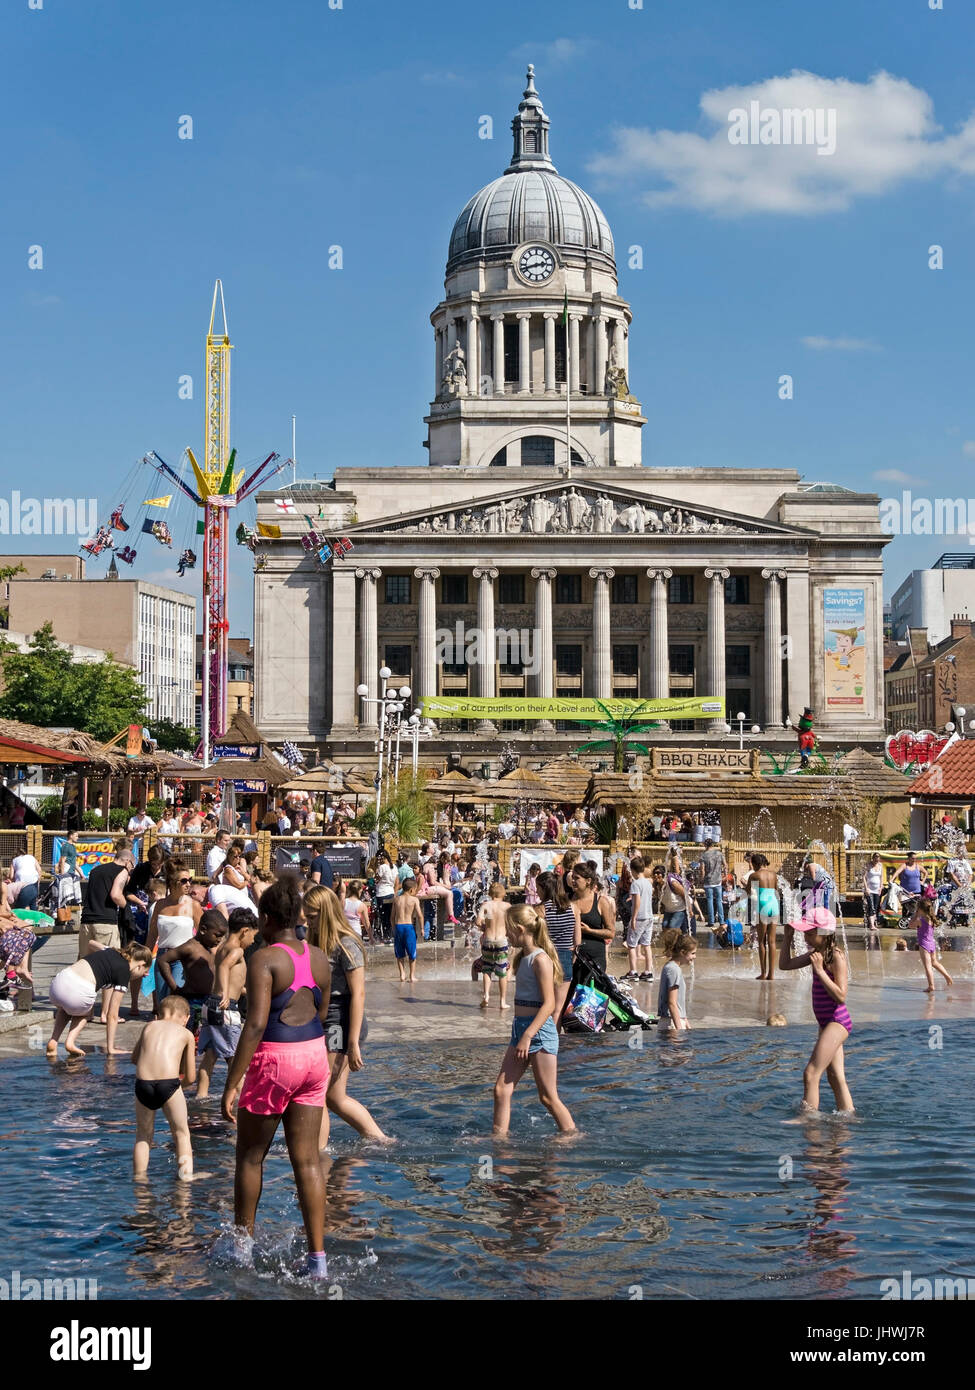 Children playing in water fountains in Old Market Square during Nottingham Beach 2016 Summer fare with Nottingham City Hall beyond, Nottingham, UK. Stock Photo